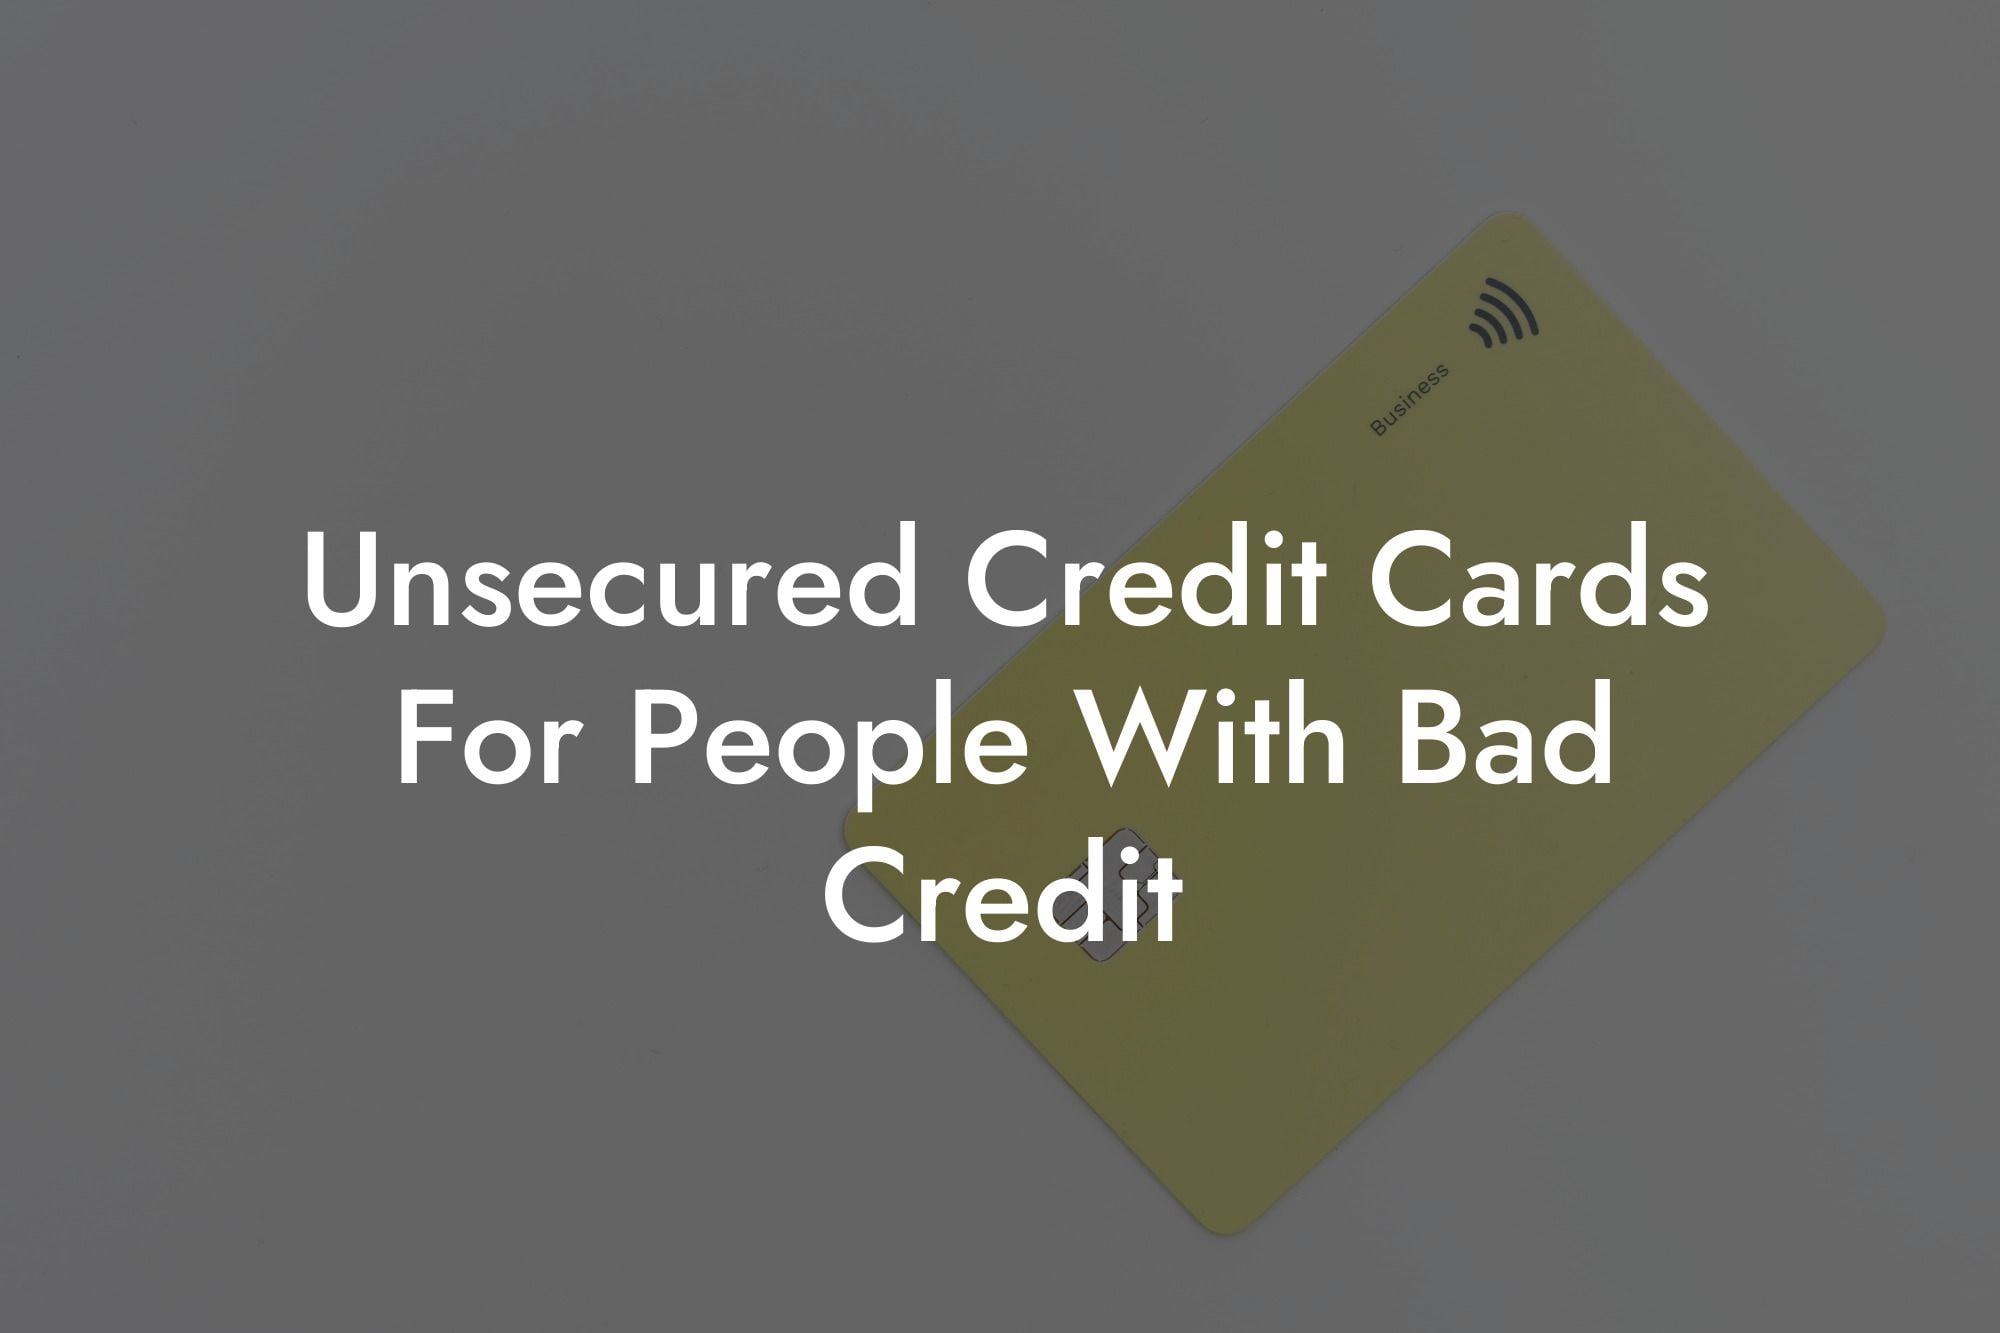 Unsecured Credit Cards For People With Bad Credit